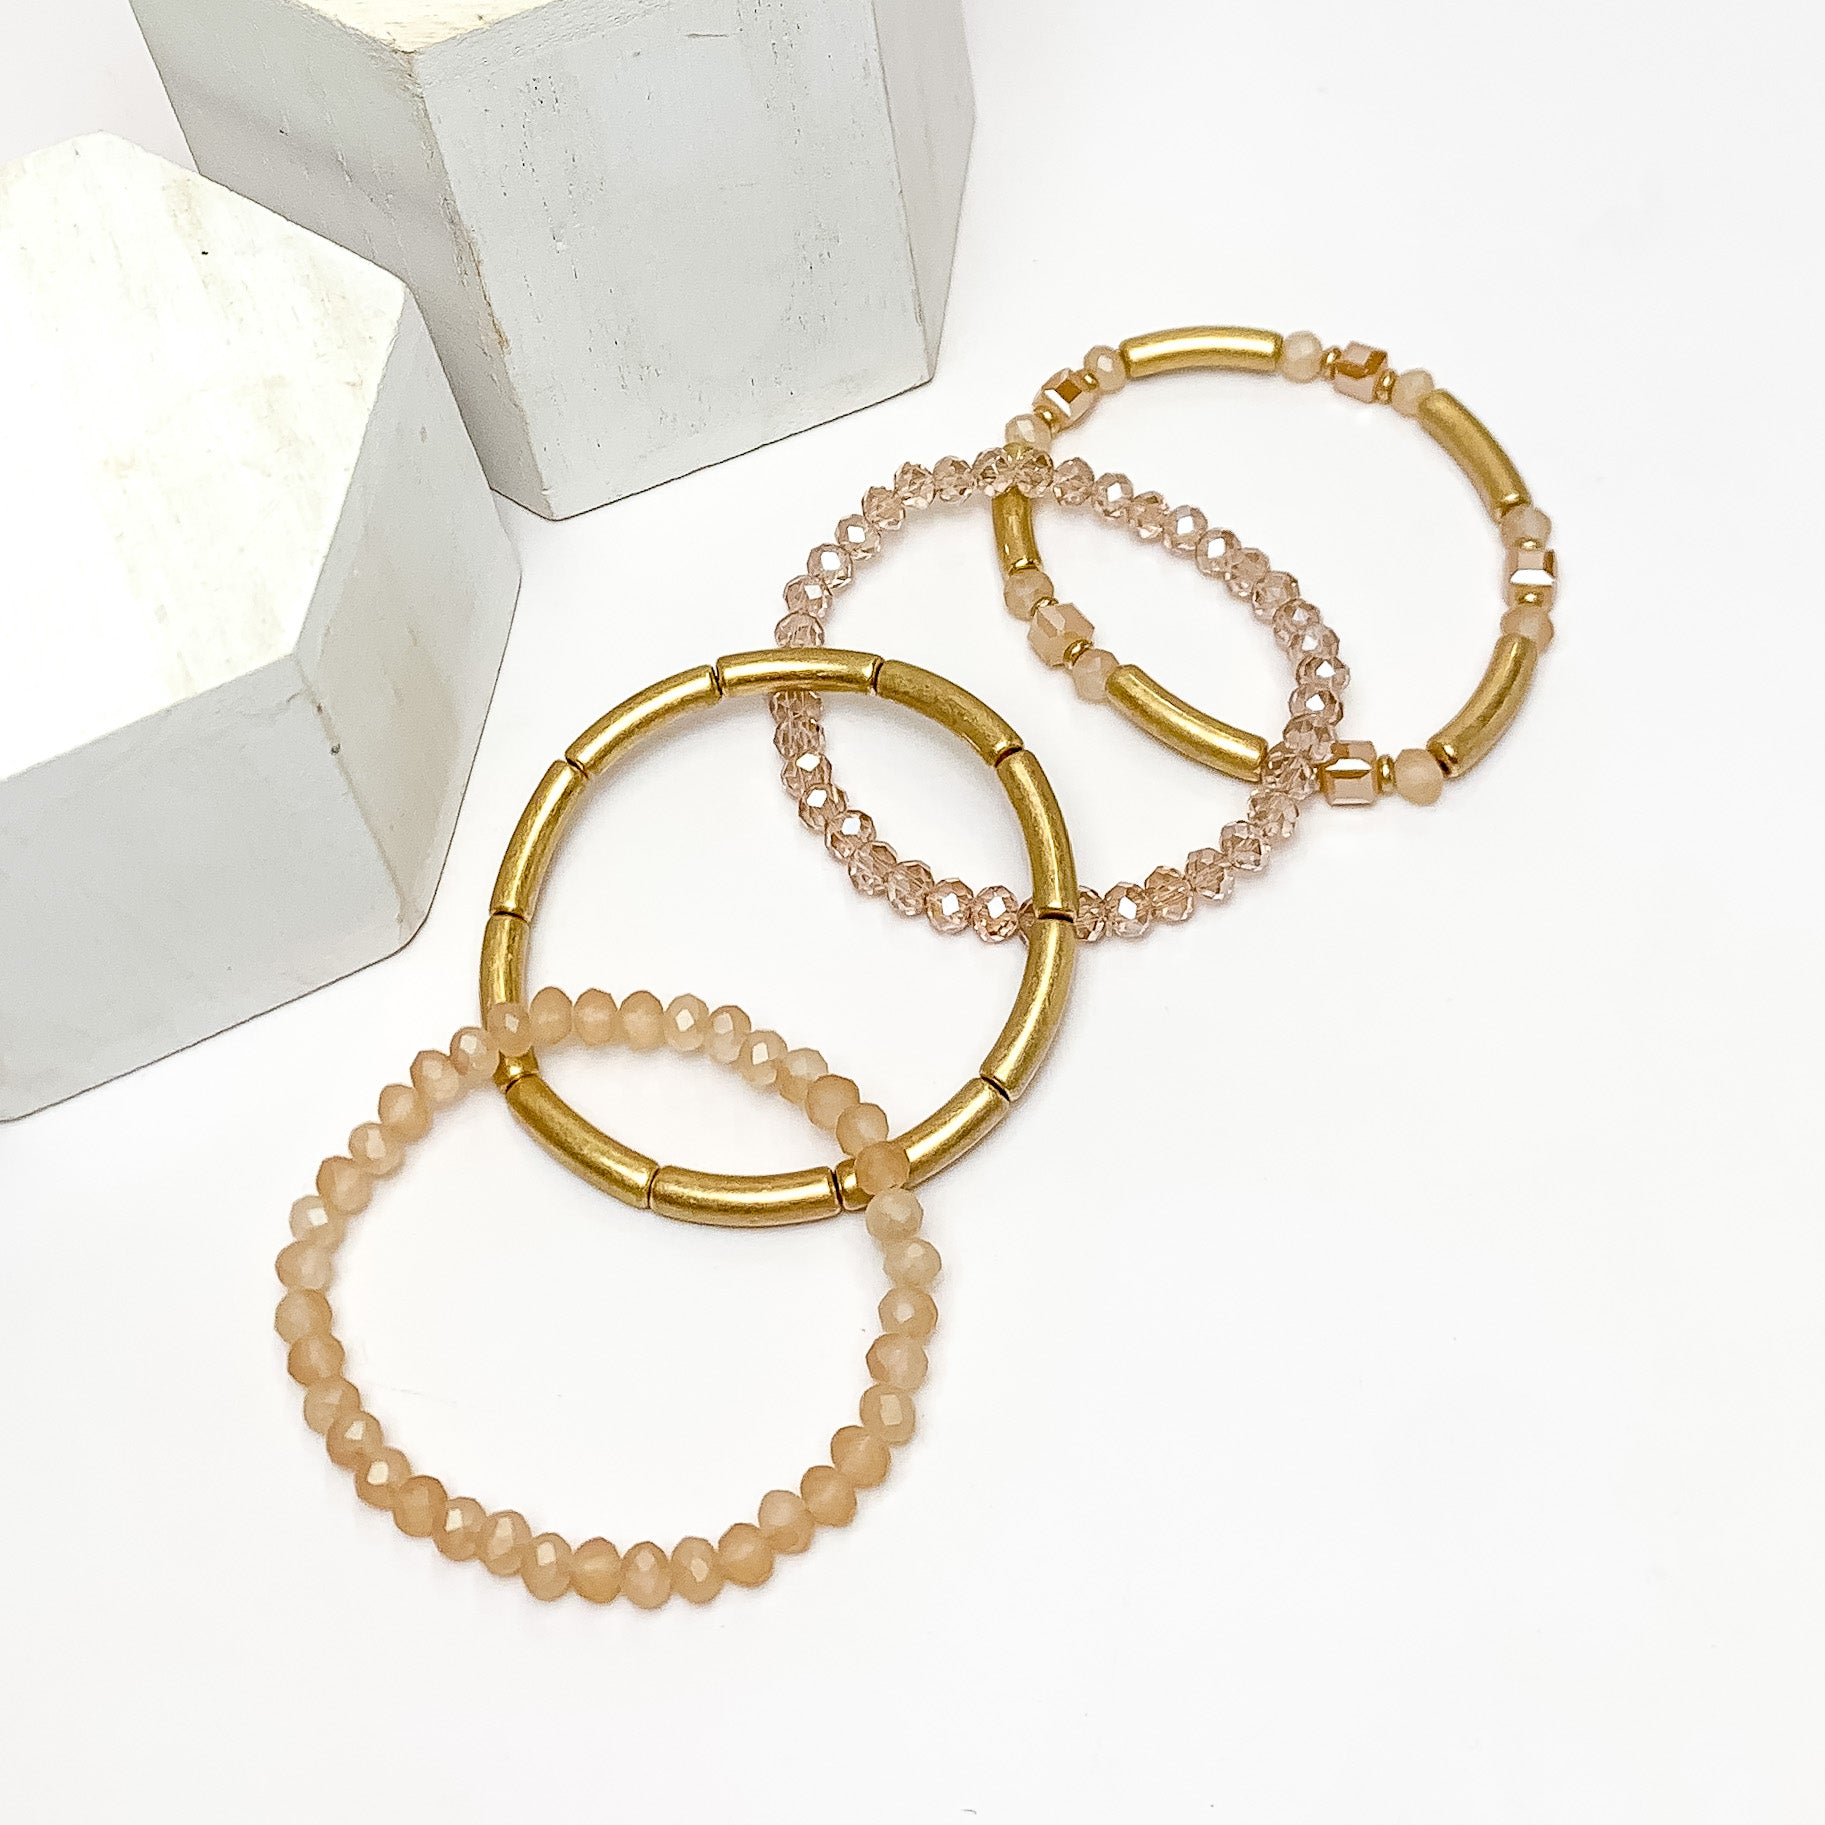 Set of Four | City Trip Beaded Bracelet Set in Gold Tone and Ivory. Pictured on a white background with two white podiums behind the bracelets.